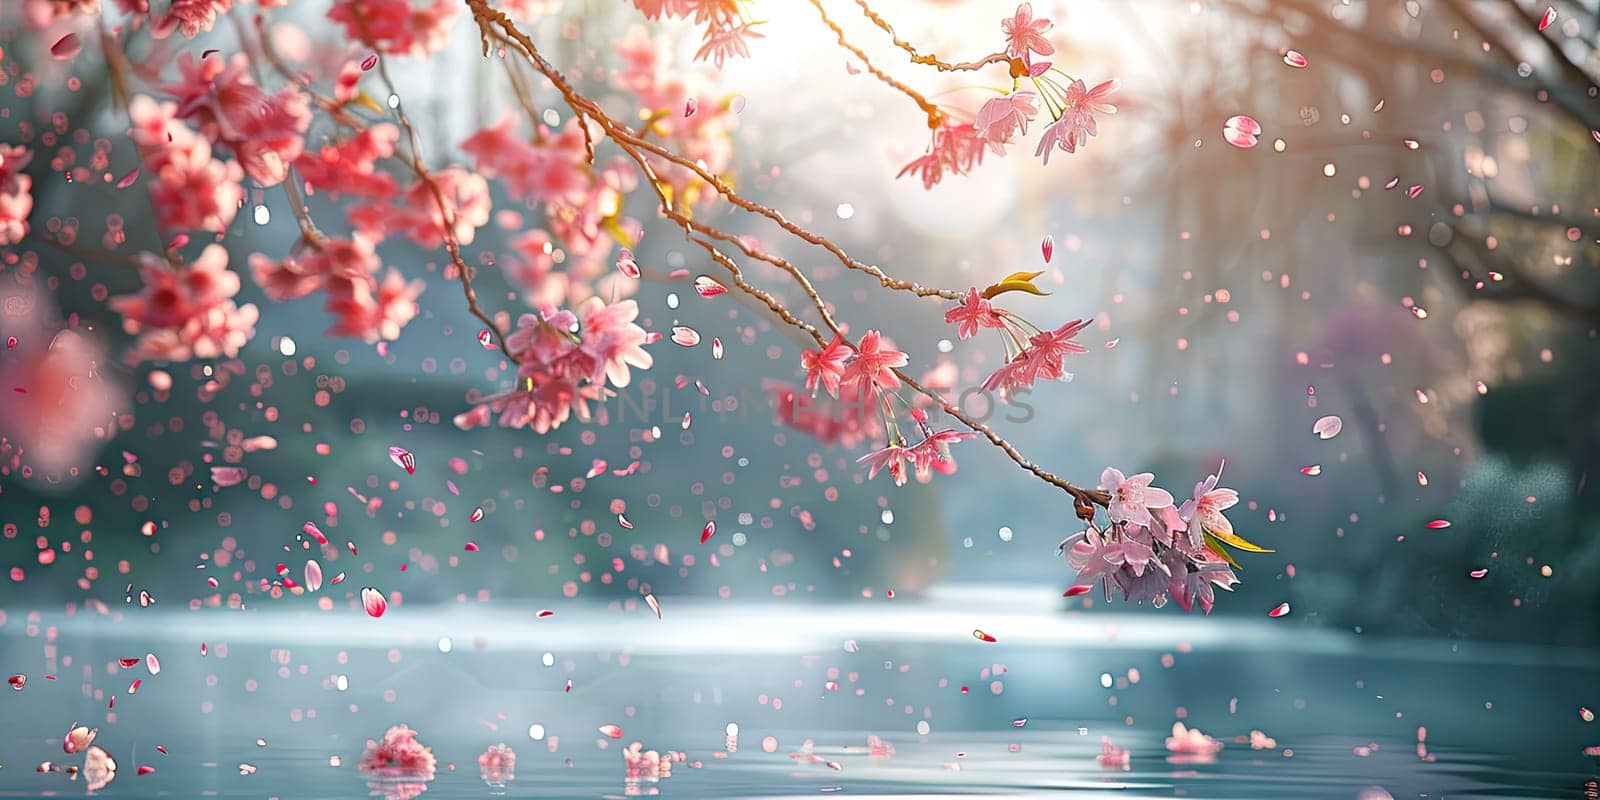 Cherry blossom branches over water, with bright pink flowers and petals falling into water in lake. Seasonal sakura blossom. Ai generation. High quality photo